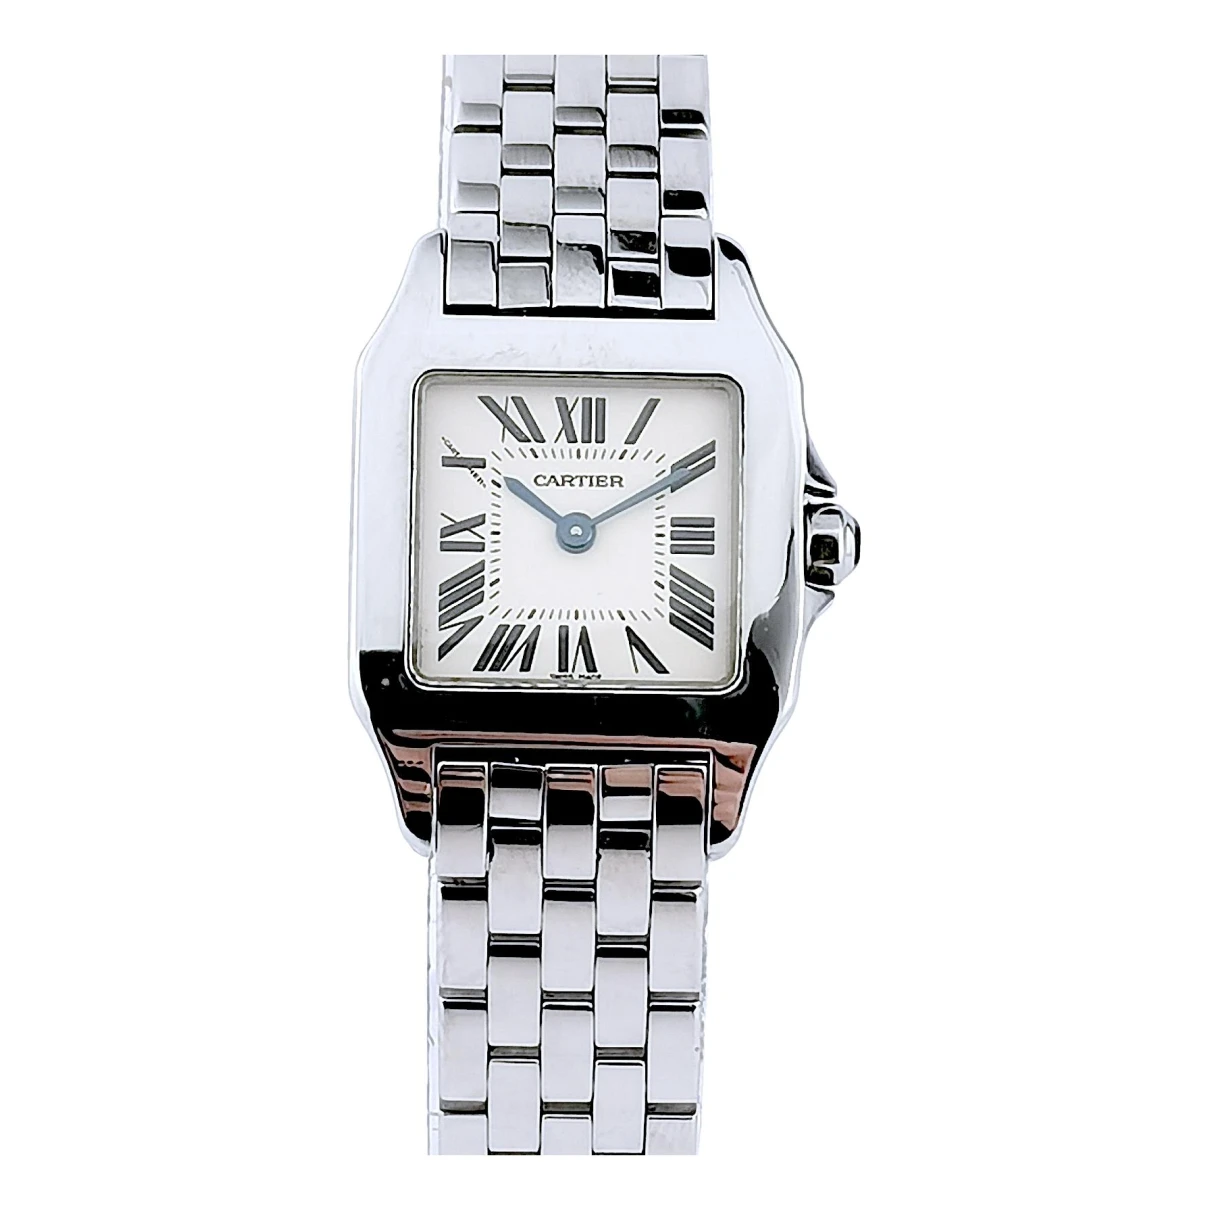 accessories Cartier watches Santos Demoiselle for Female Steel. Used condition